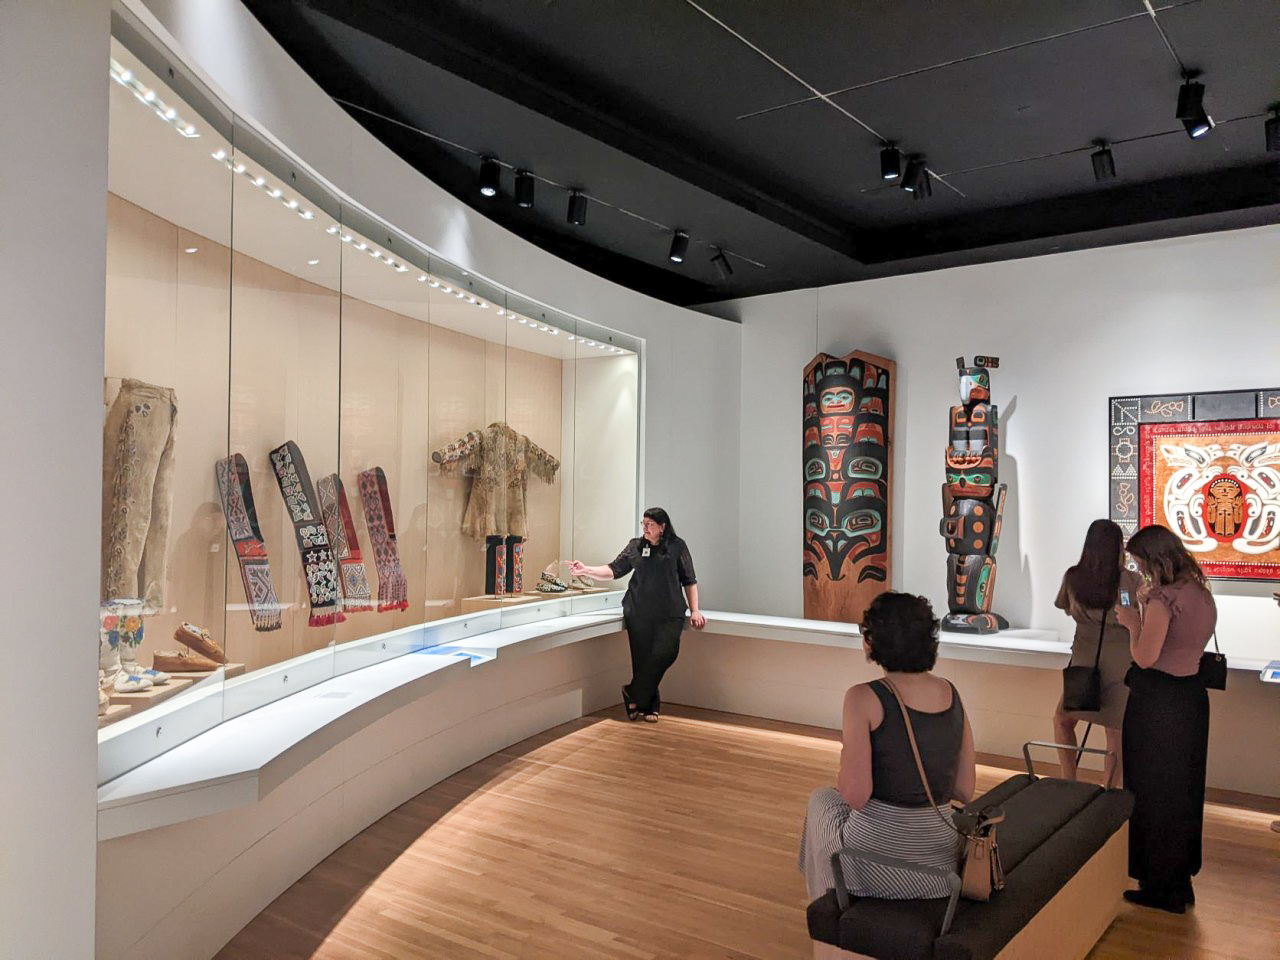 A wide view of a museum gallery space with three people listening to the curator talk about the exhibit. The exhibition is of Native American and Indigenous Art.